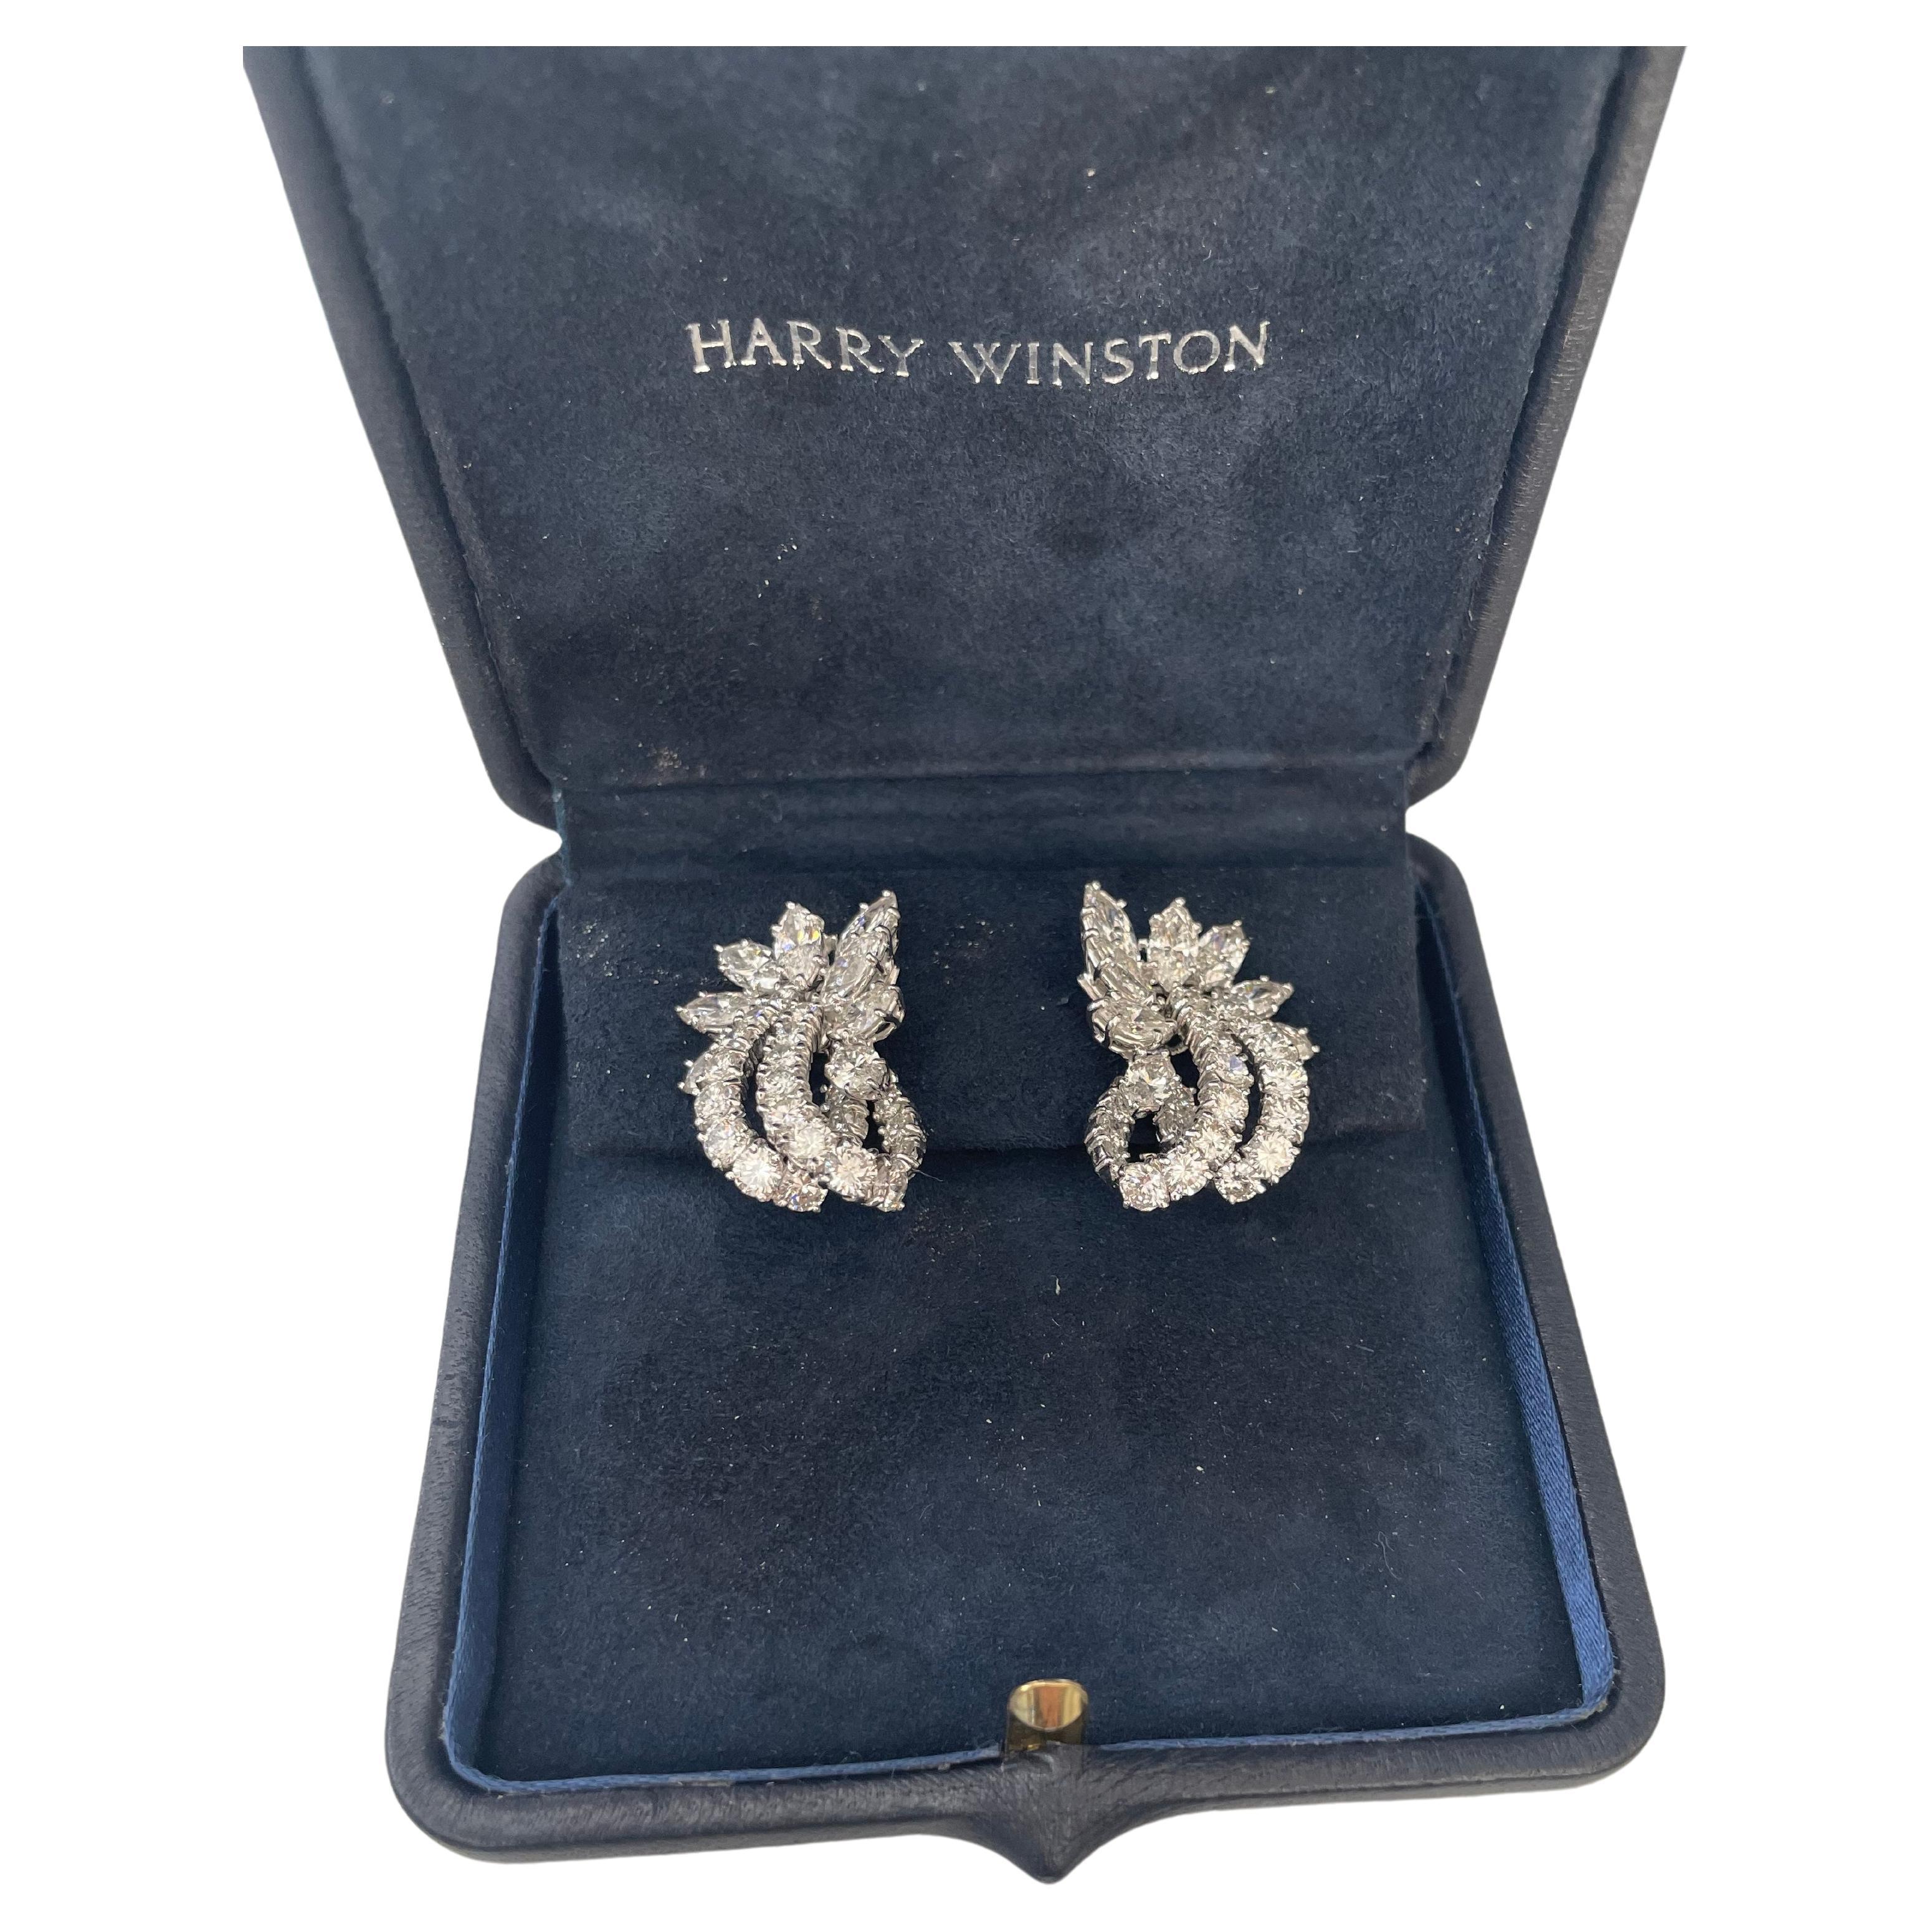 Harry Winston  (Jacque Timey) Diamond Earrings 
This pair of earrings
has 16 marquise shaped diamond clusters weighing
5.40ct (Color: D-F, Clarity: VS) each suspending a pair of graduated diamond set hoops set with 4 round brilliant-cut diamonds